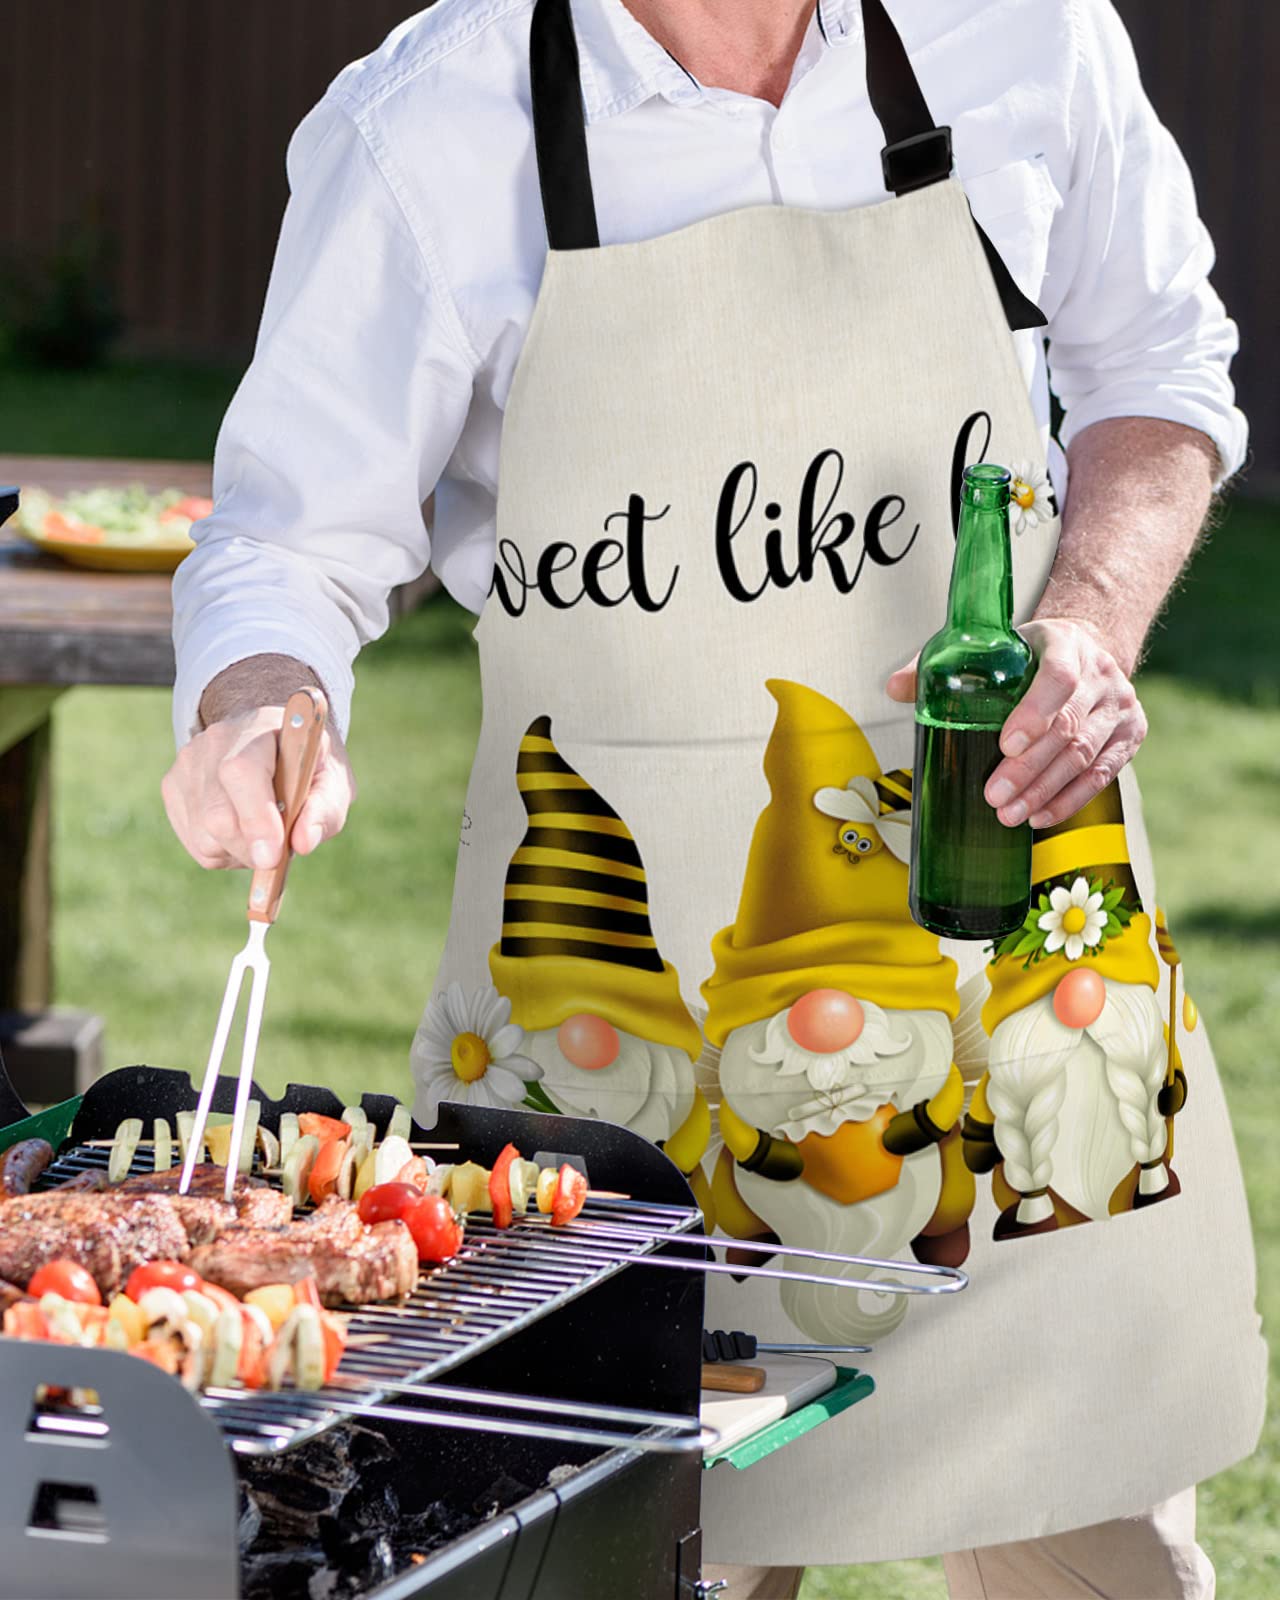 CirCleO Waterproof Stain-Proof Apron for Women Men,Cooking Baking Apron with Pockets Summer Daisy Gnomes Bee Adjustable Apron